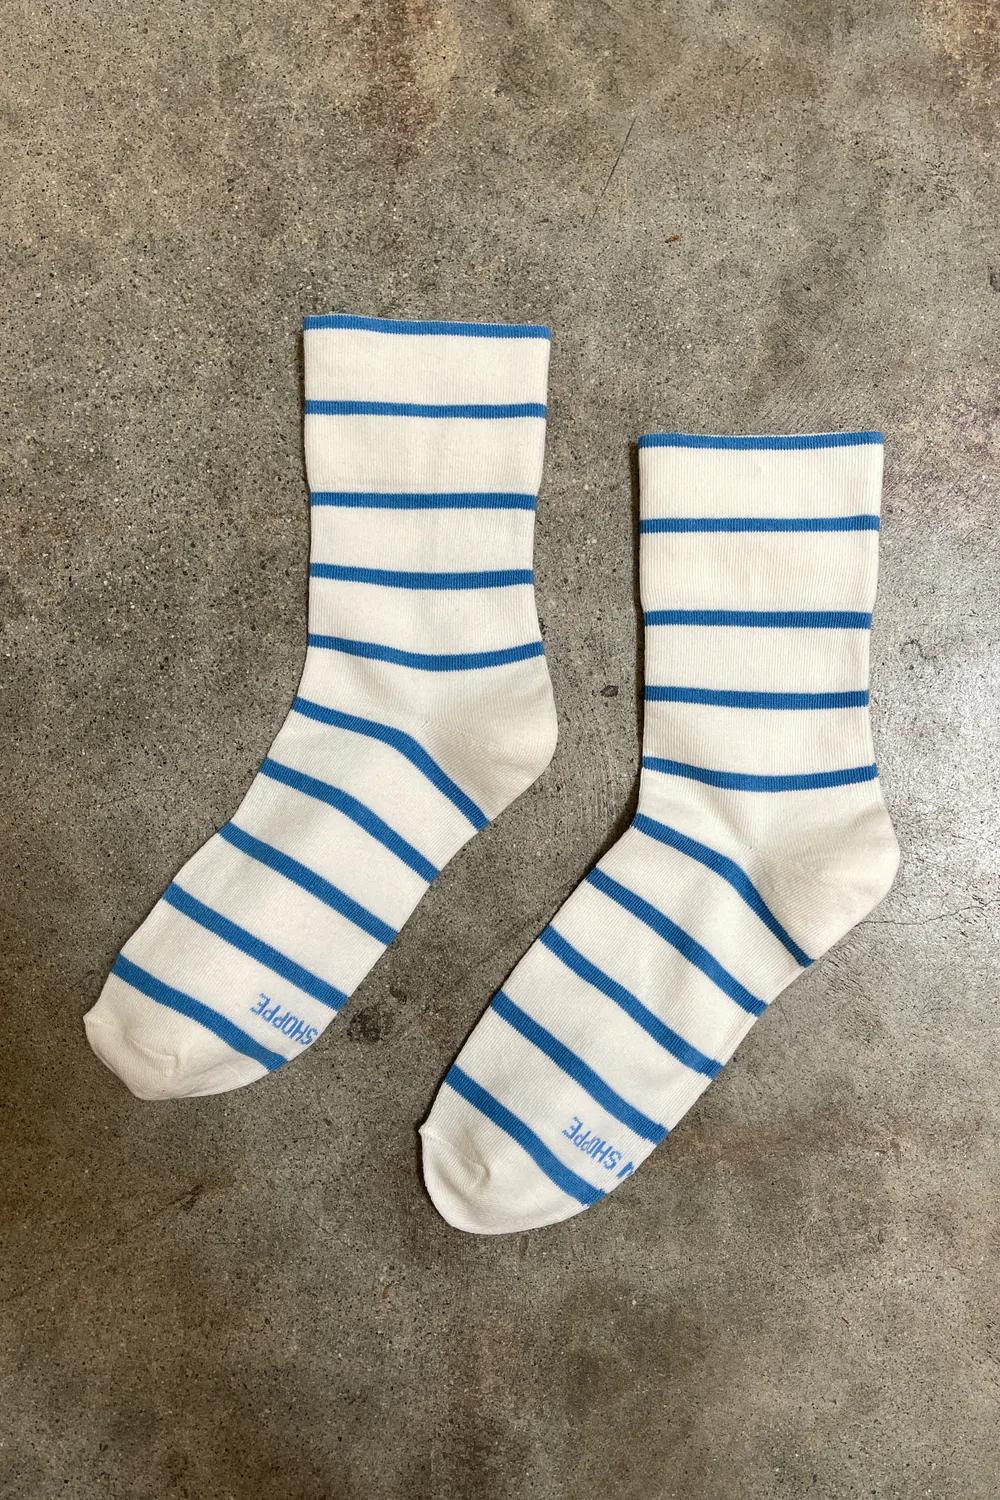 Product Image for Wally Socks, Ciel Blue